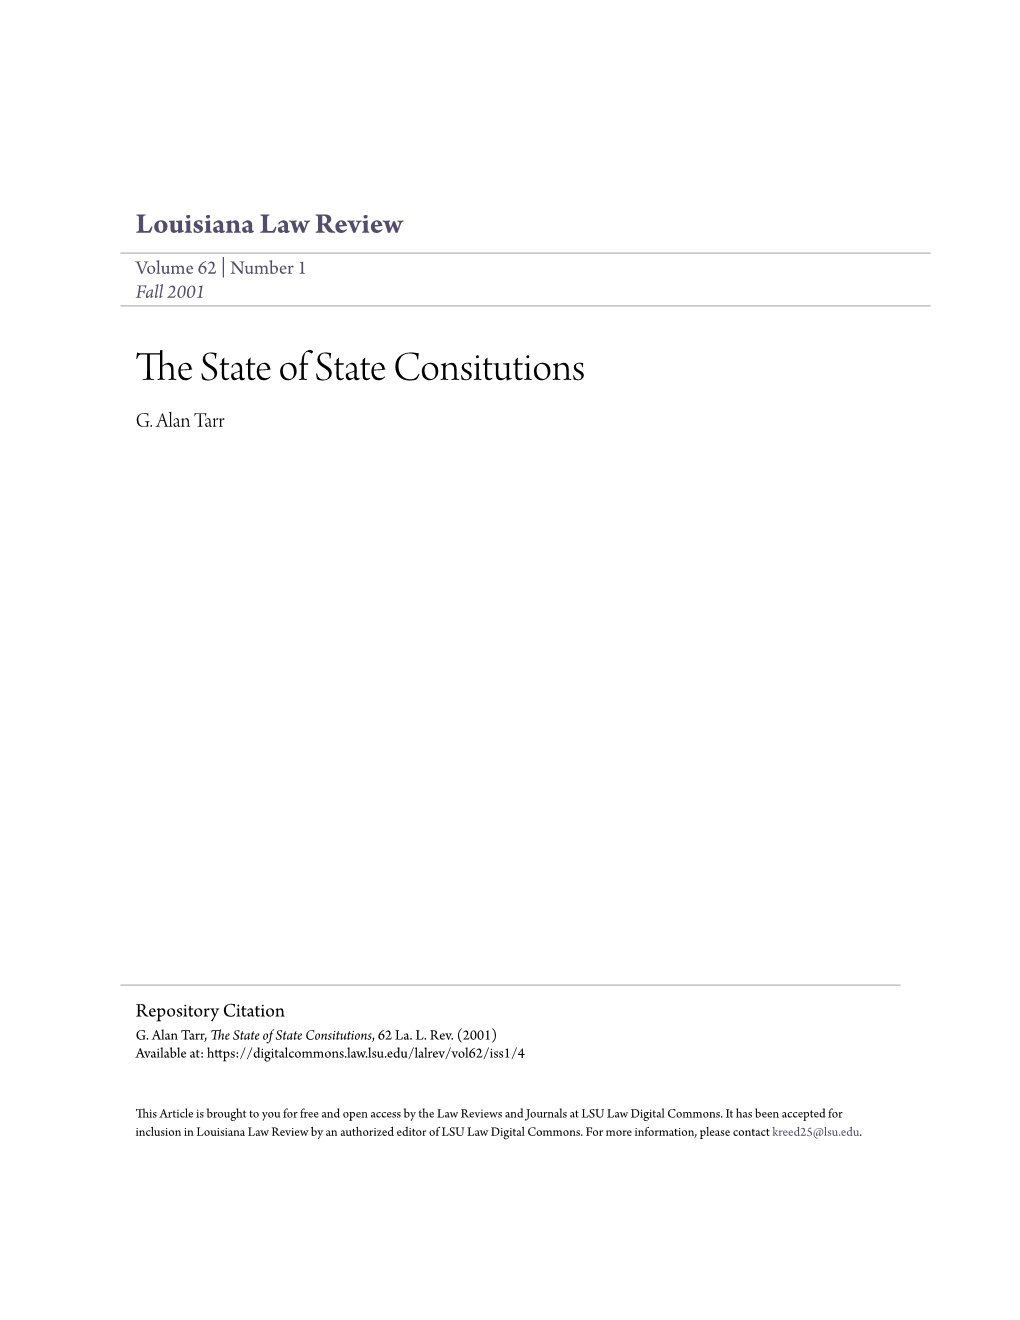 The State of State Consitutions, 62 La